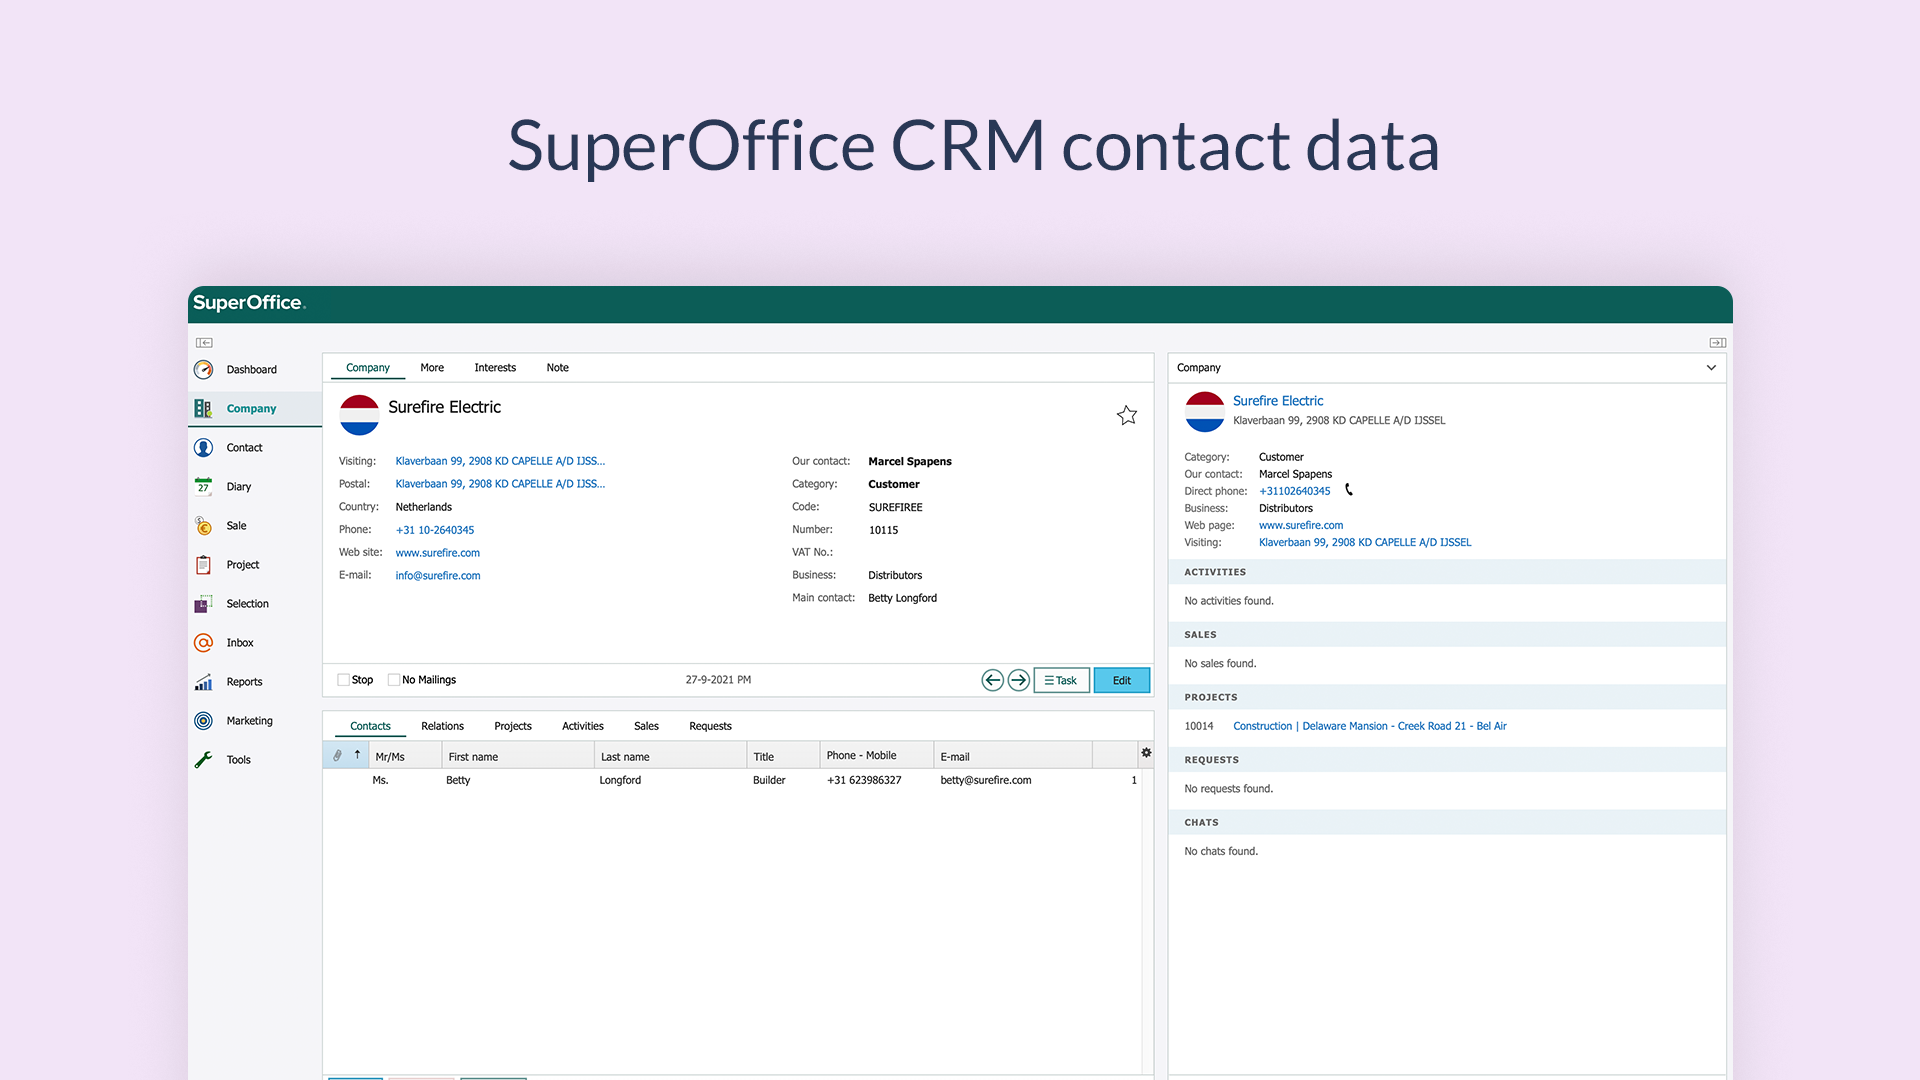 SuperOffice CRM contact data